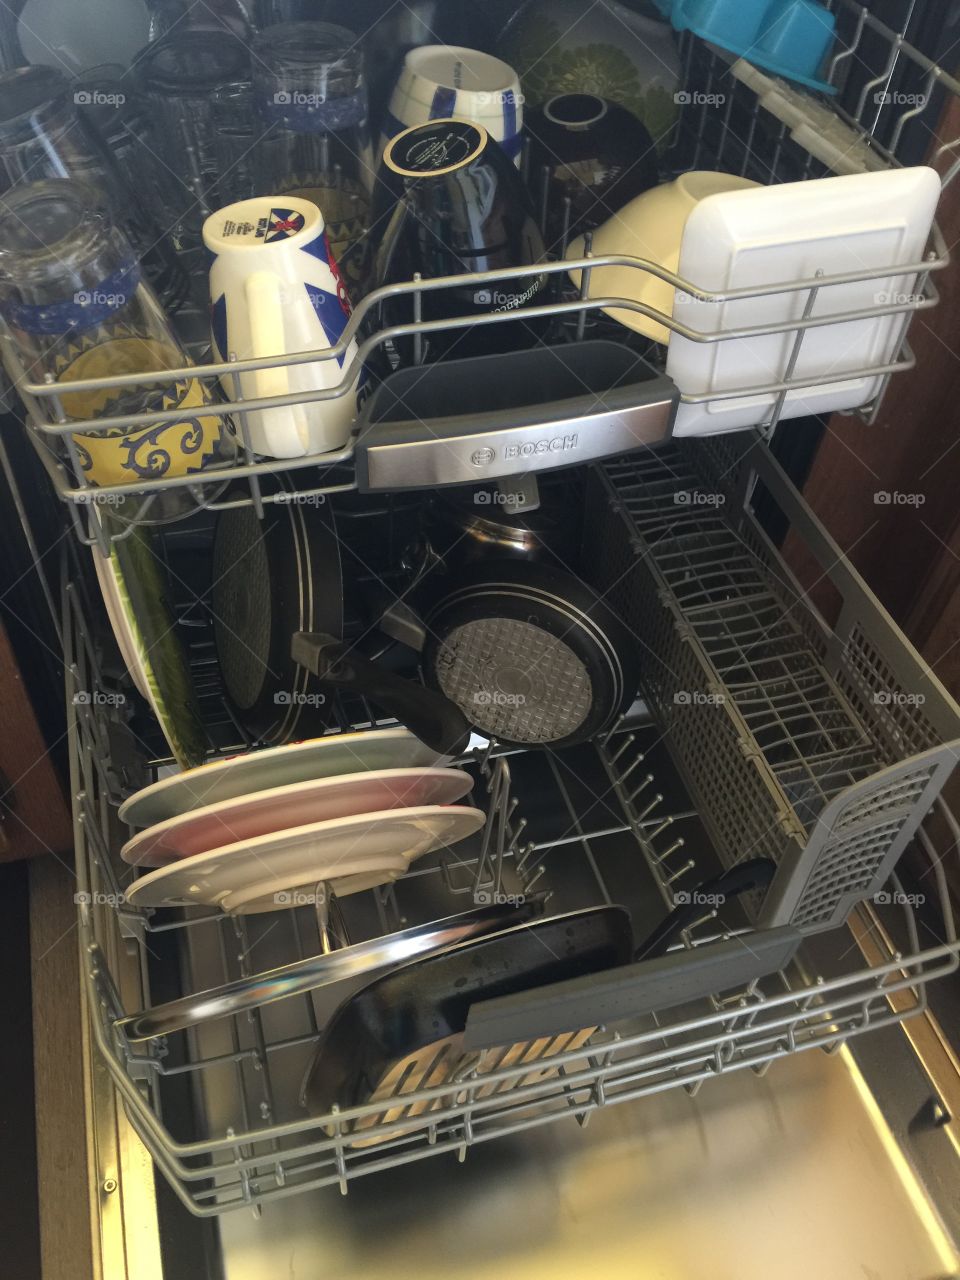 Clean dishes